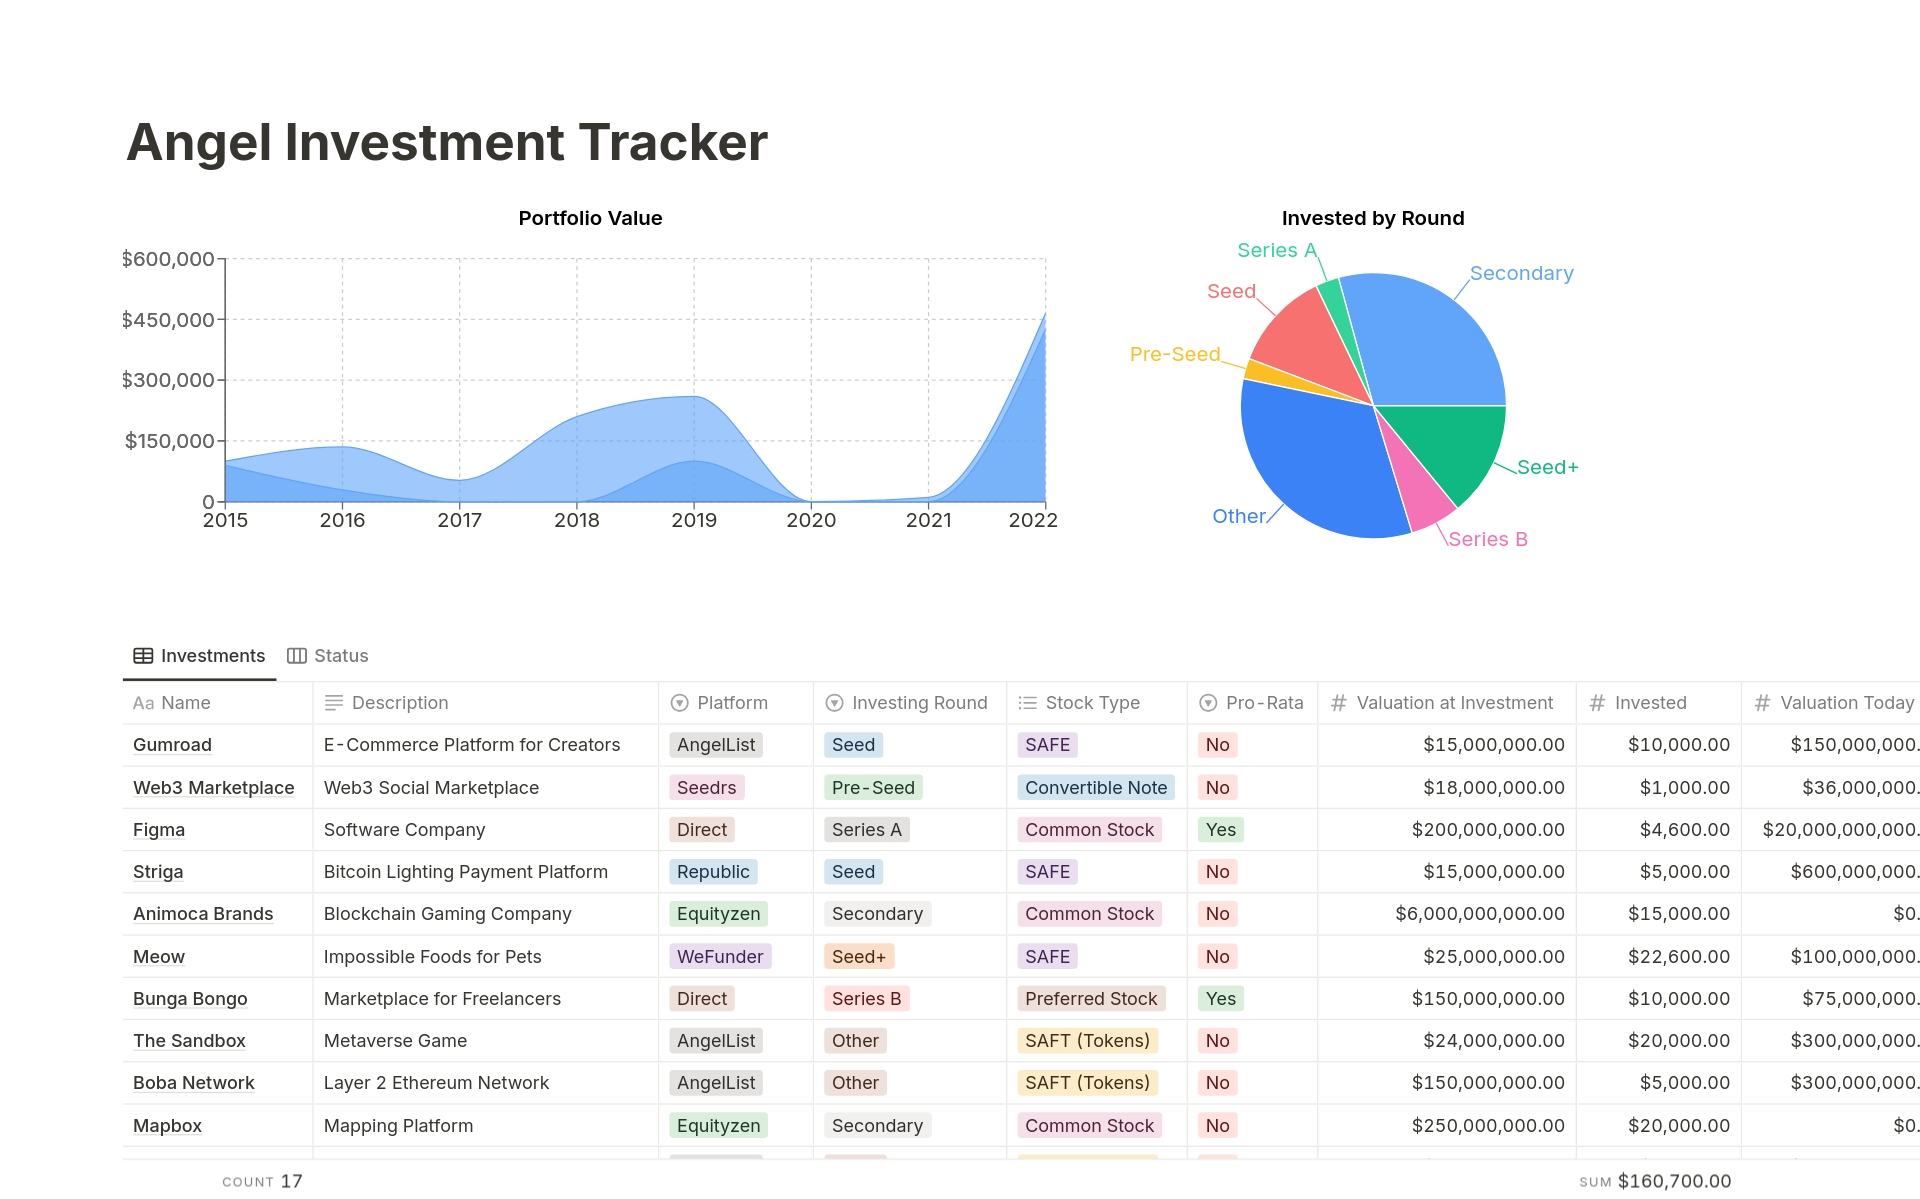 This powerful tracker template for Notion is the perfect way to stay on top of your angel investments. Keep track of the companies you have invested in, at what valuations, how much your portfolio is worth, and much more. This tracker is a must-have tool for angel investors!